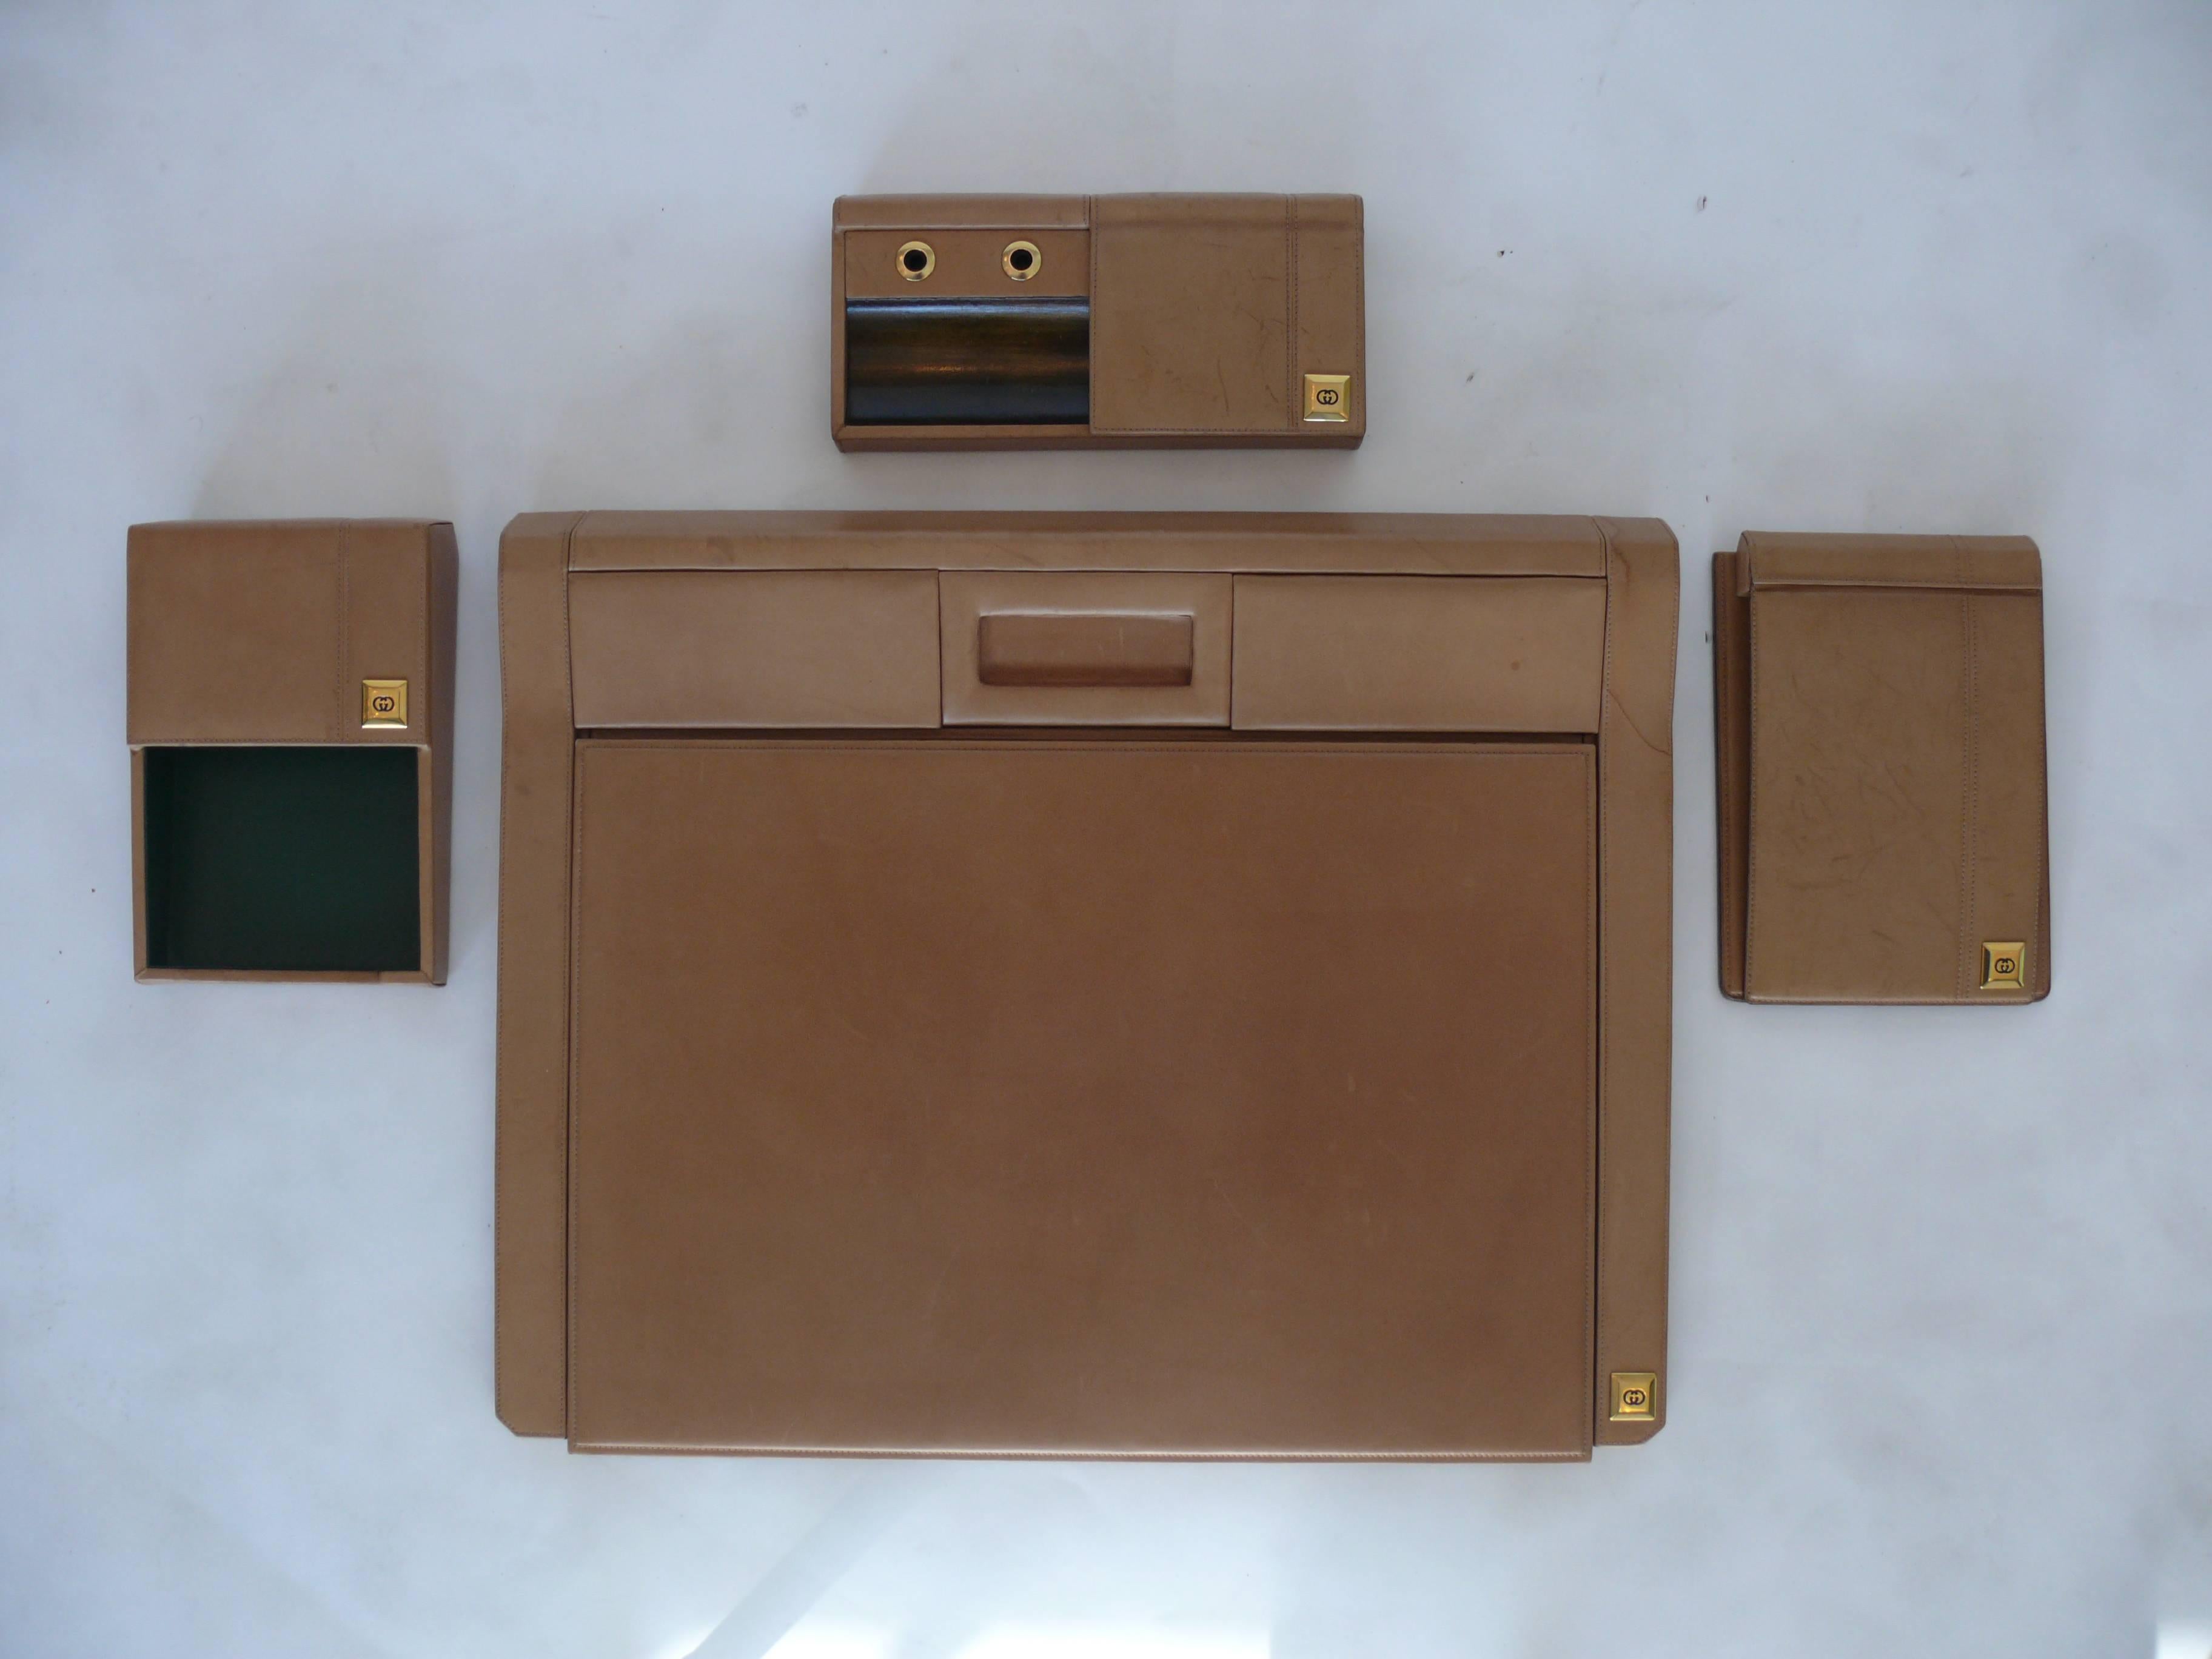 Incredible Gucci desk accessory collection. Set includes an ink blotter desk pad, note pad, letter holder and pen holder. Beautiful carmel colored brown leather with age and patina. Each item is embossed by the Gucci insignia. Stunning vintage set.